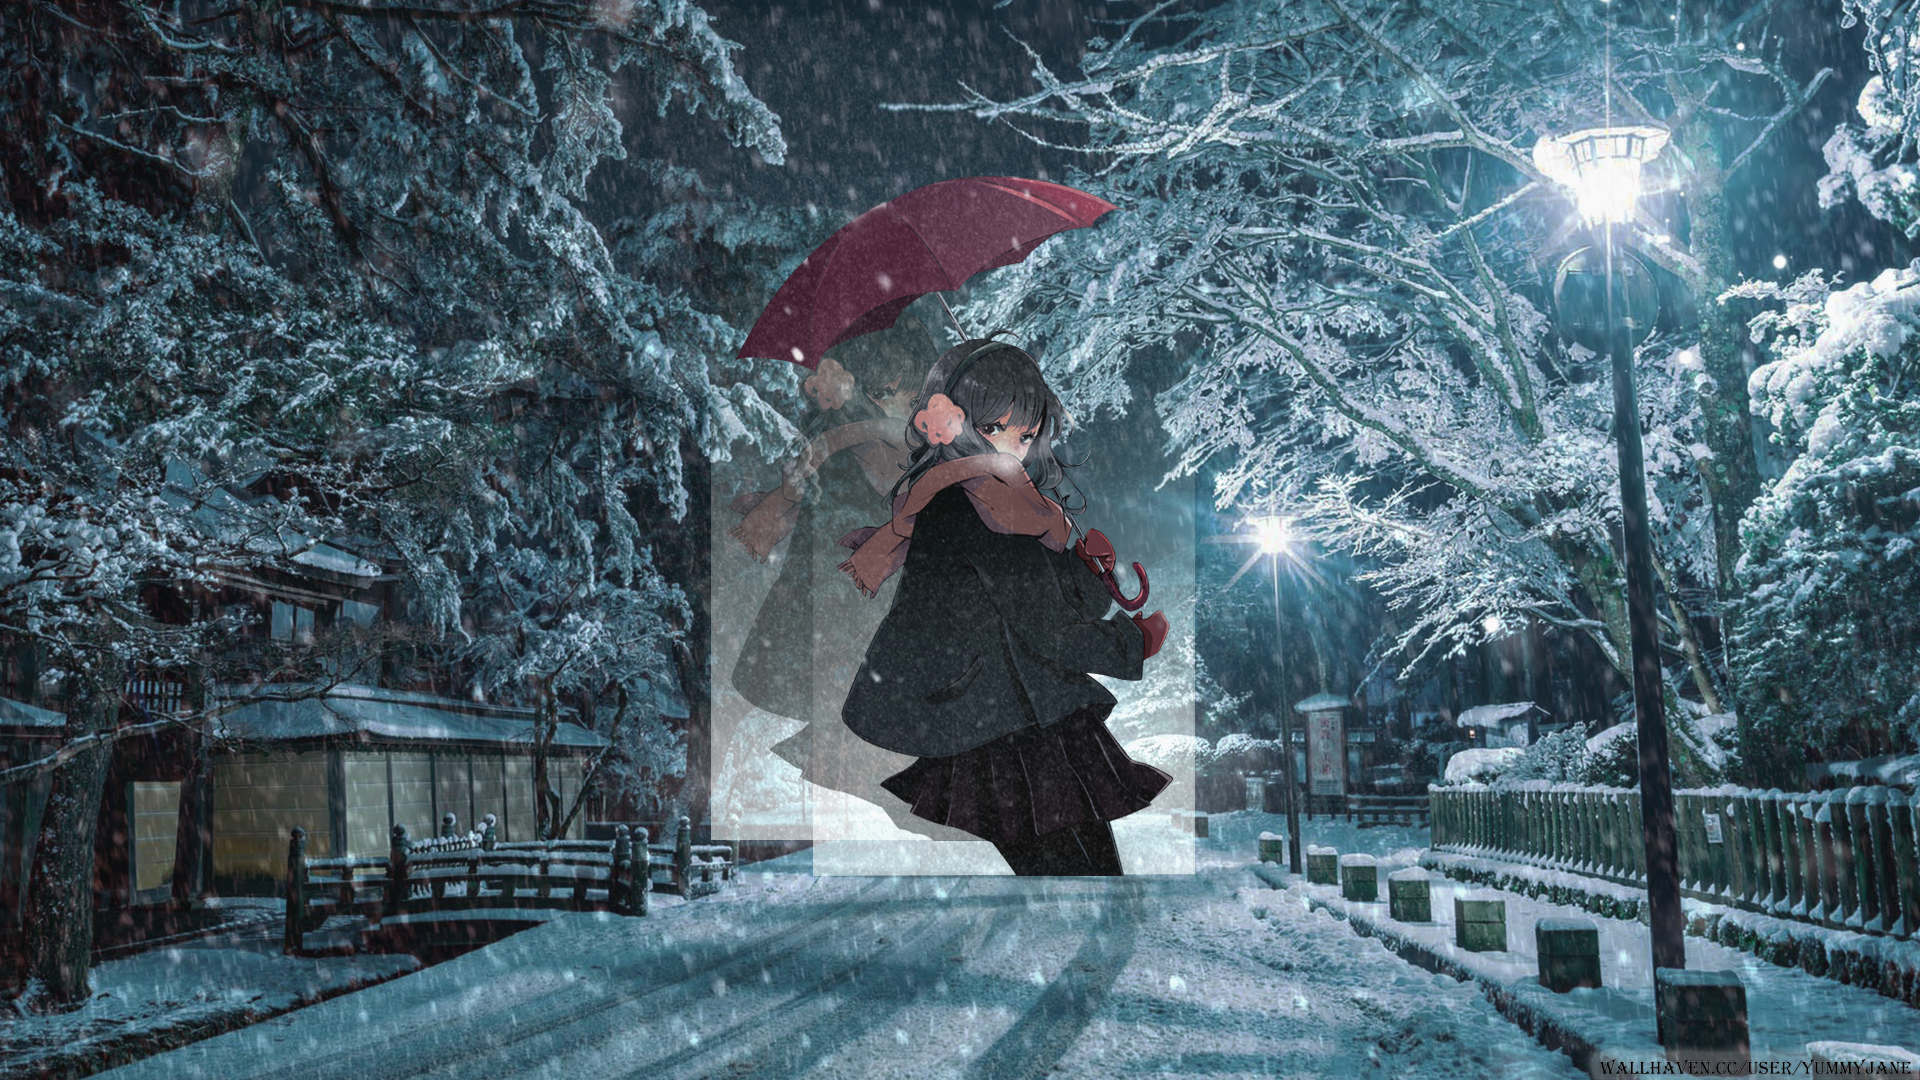 Anime 1920x1080 picture-in-picture anime anime girls winter snow night umbrella scarf